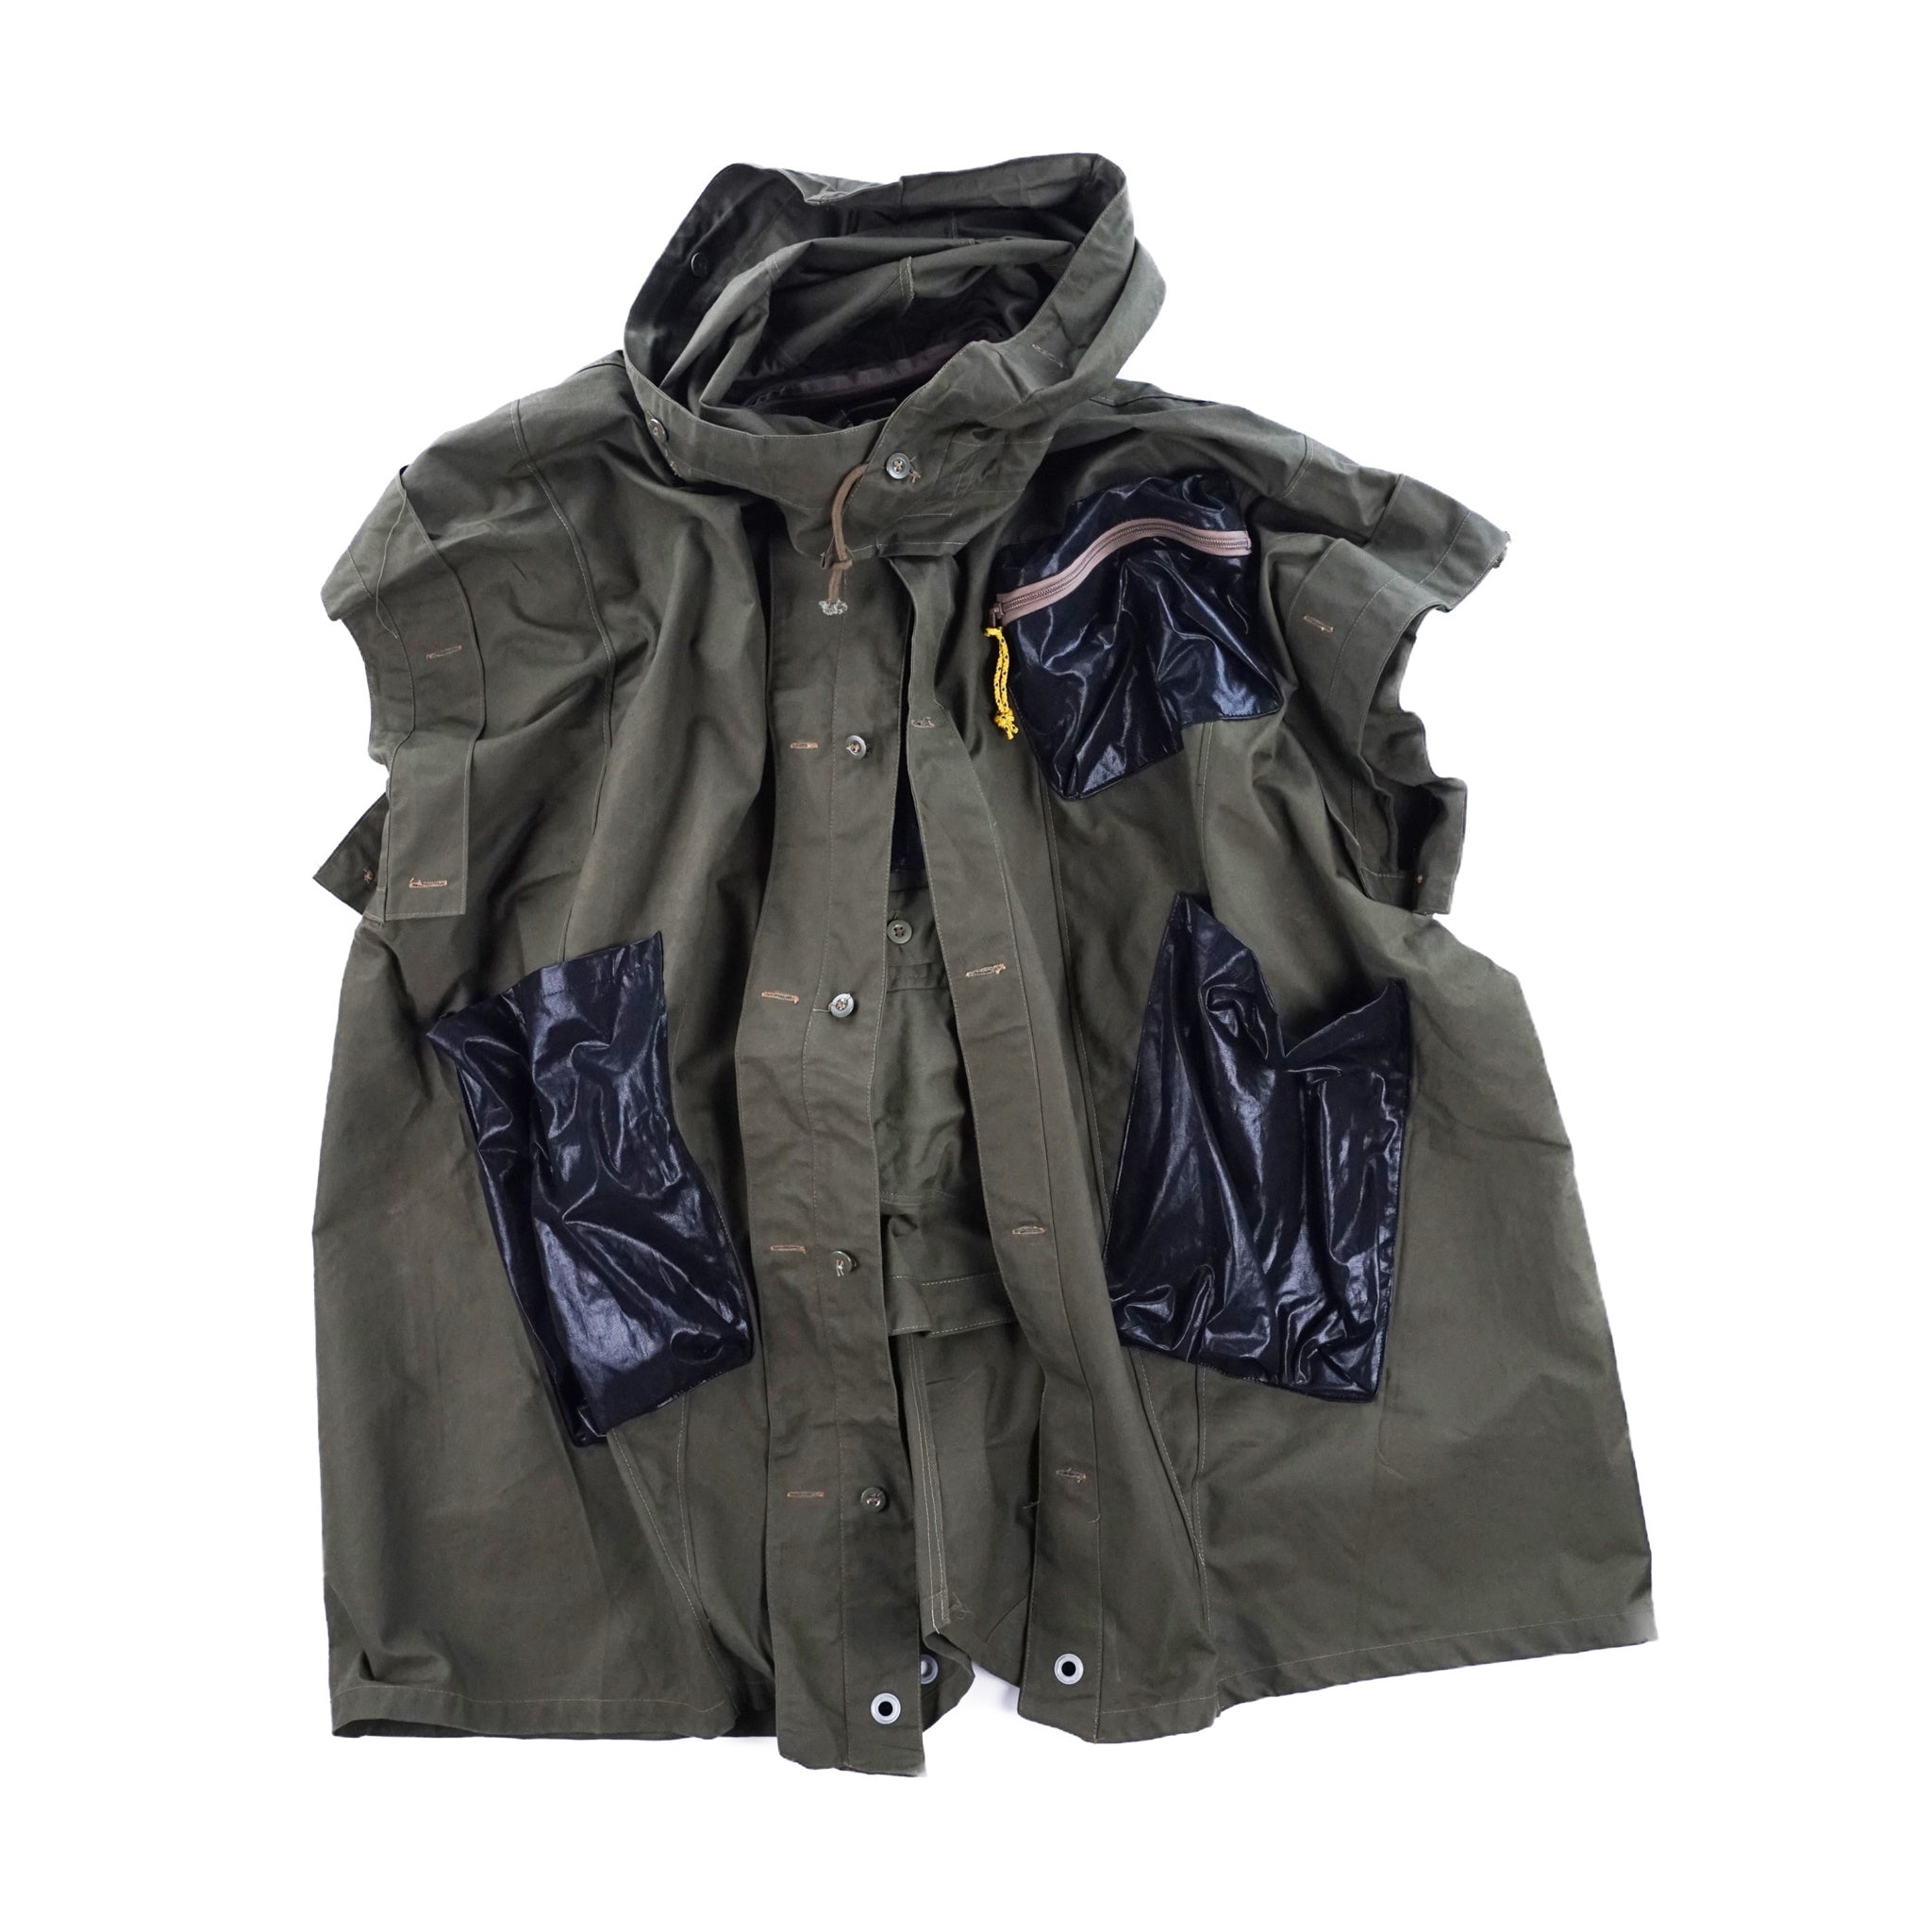 No:MO22SP-RS-PK01 | Name:U.S ARMY TENT OUTDOOR PARKA | Color:Olive